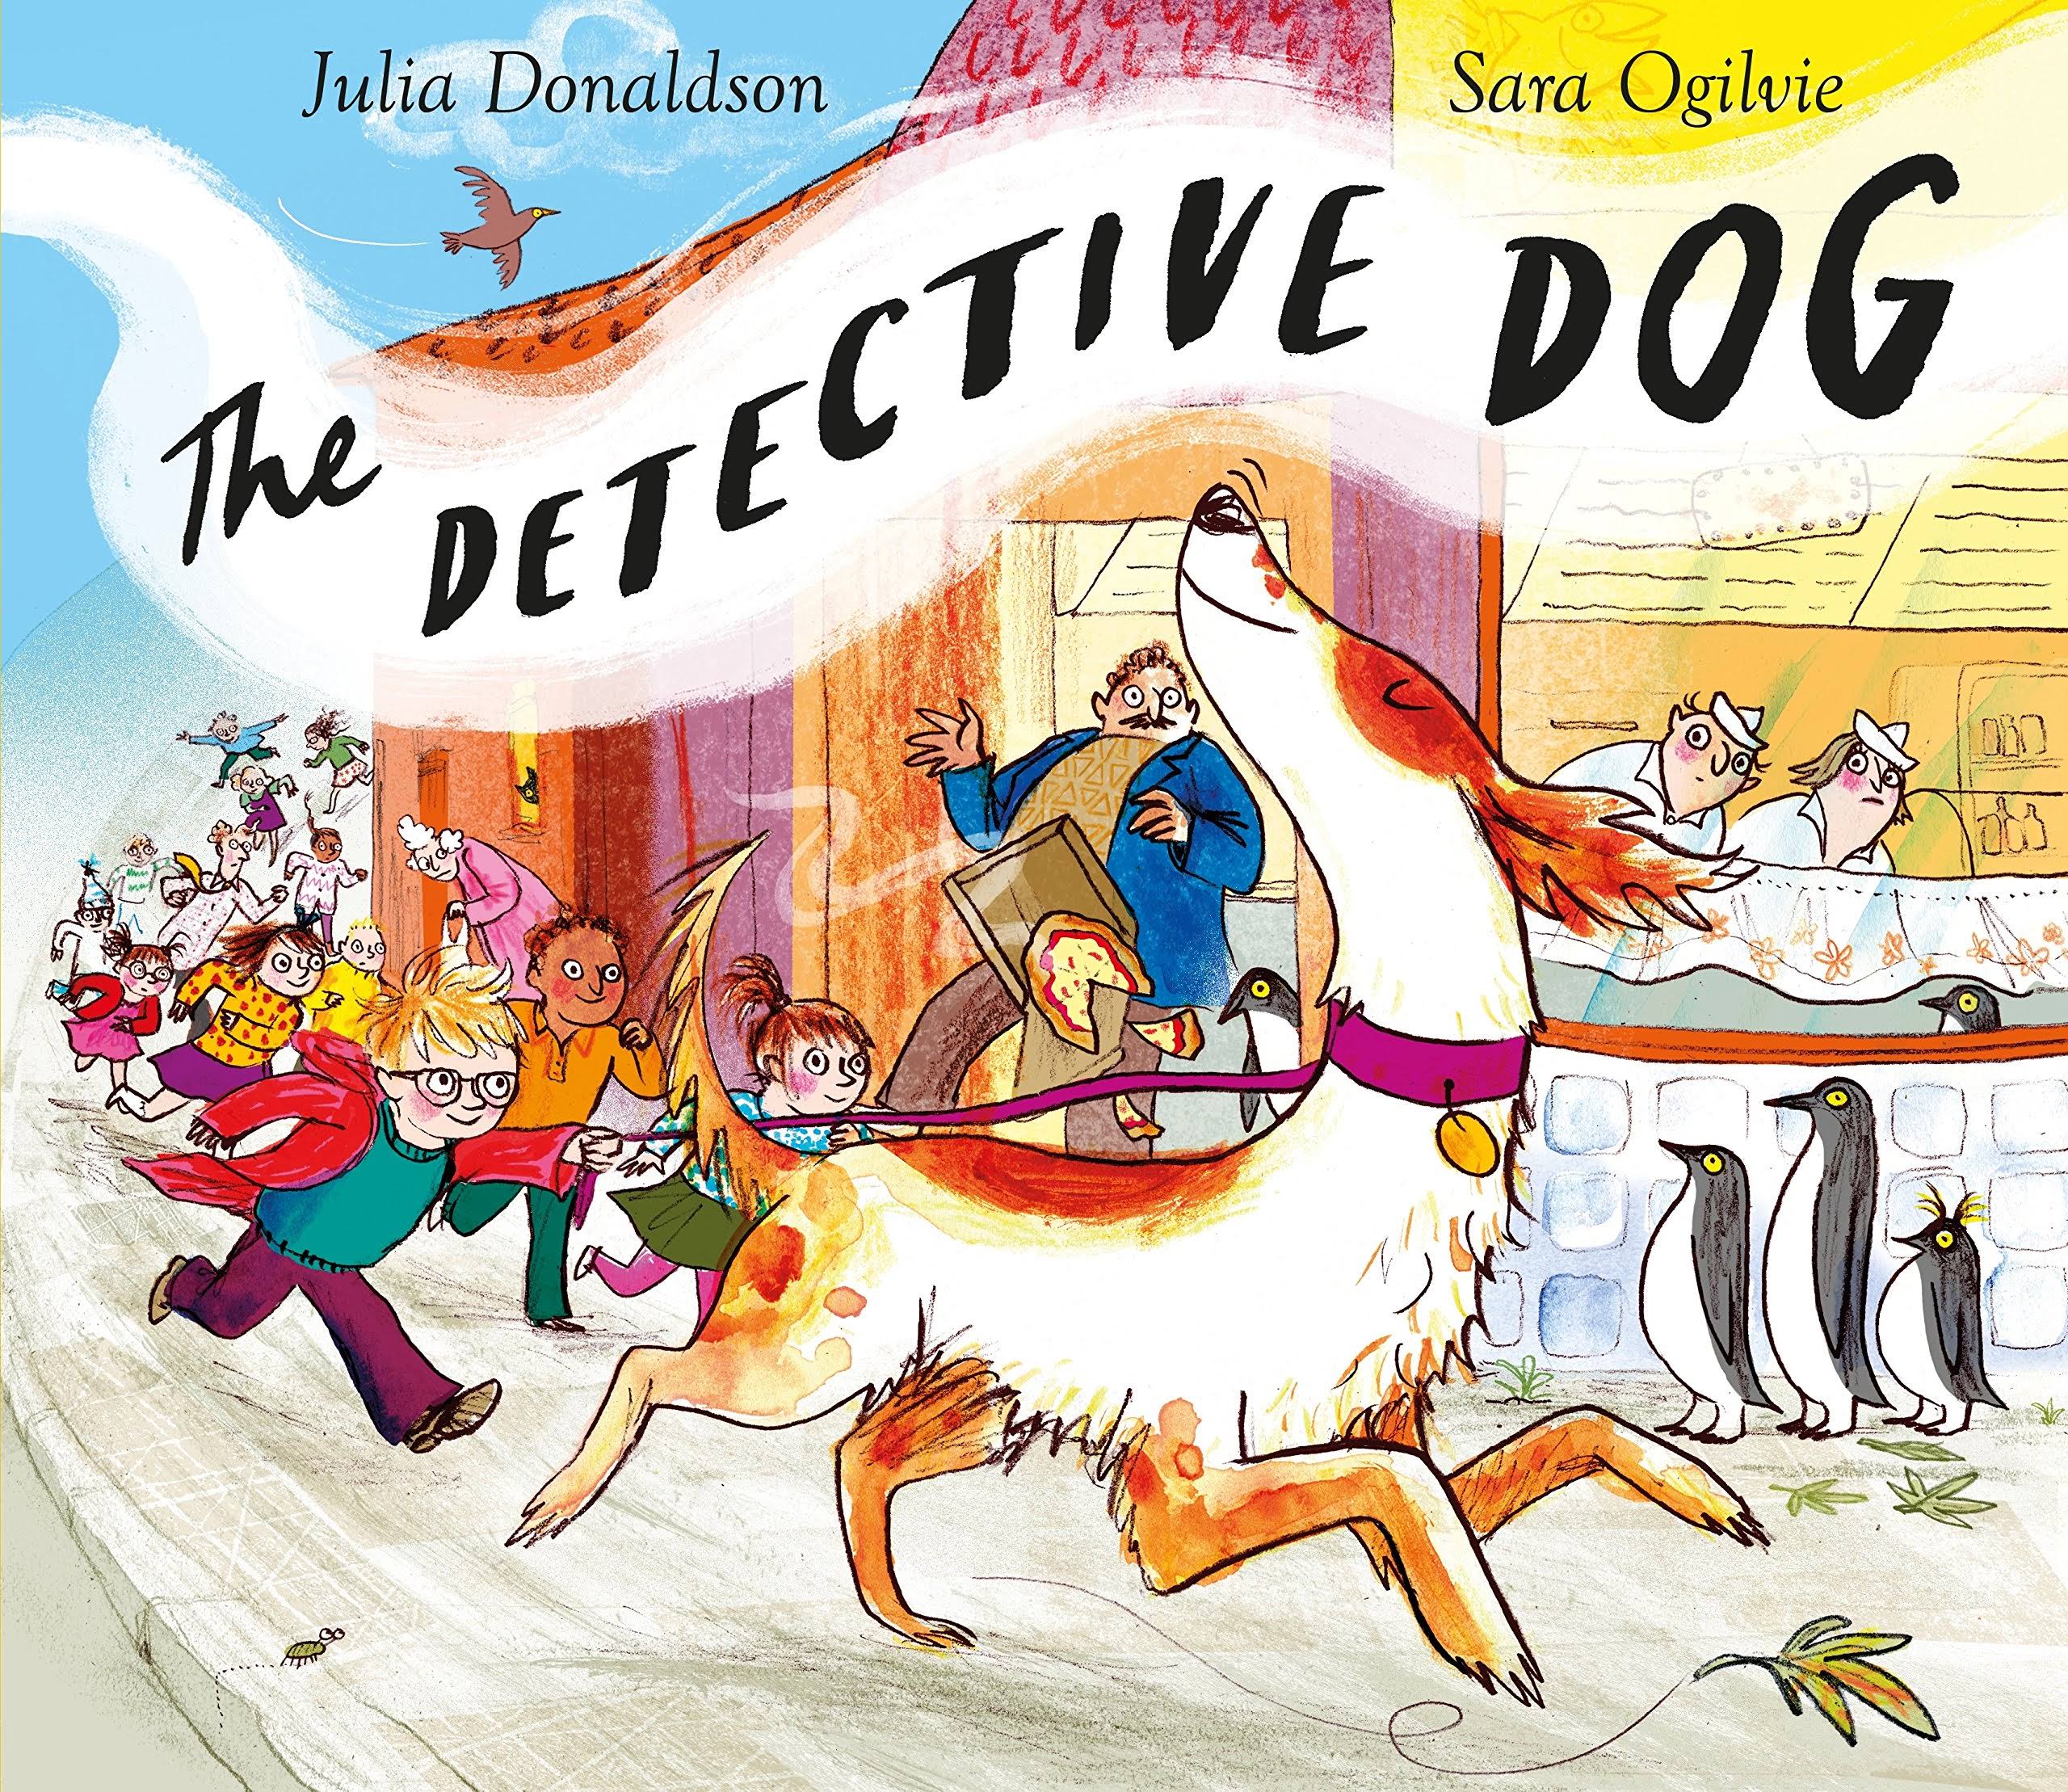 The Detective Dog [Book]